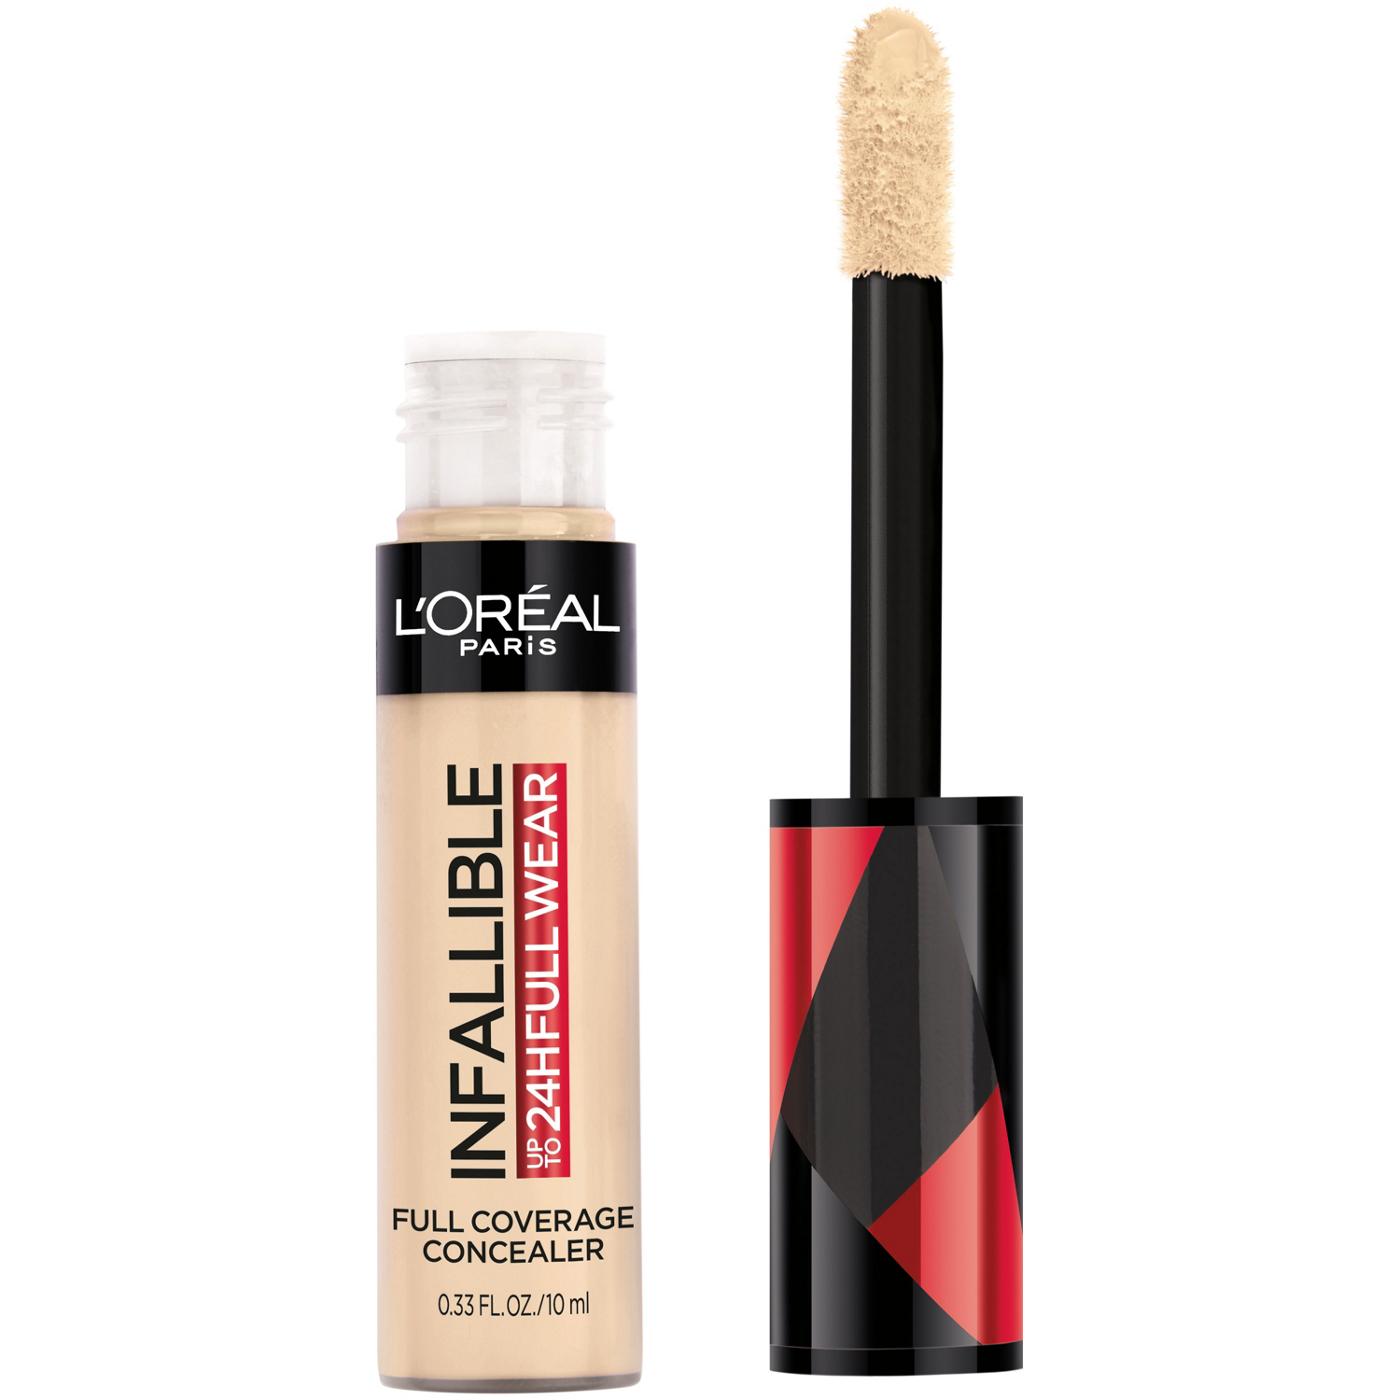 L'Oréal Paris Infallible Full Wear Concealer up to 24H Full Coverage Ivory; image 1 of 7